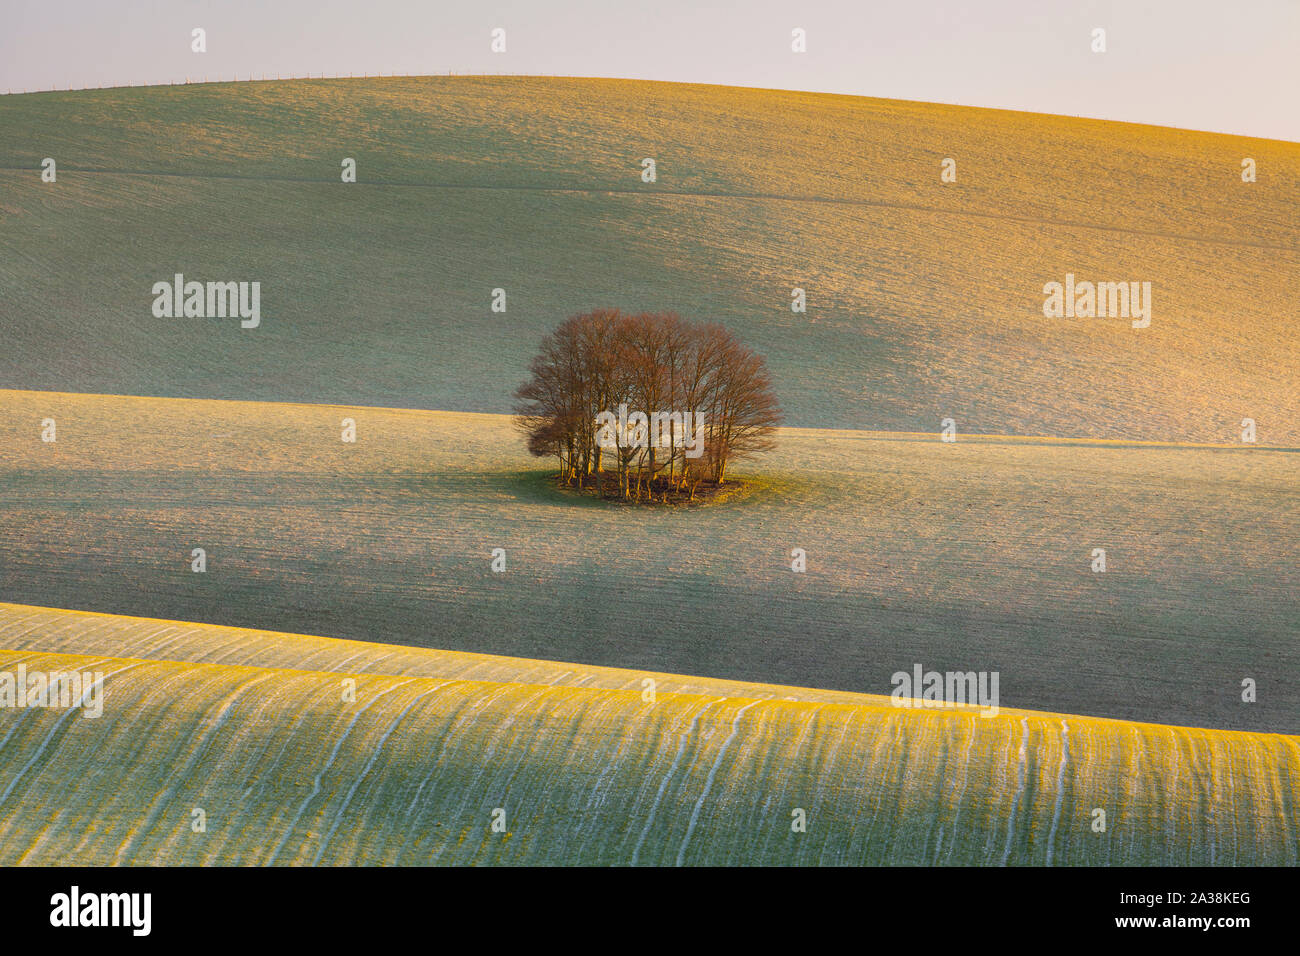 Le ondulate colline del South Downs National Park. East Sussex, Inghilterra Foto Stock